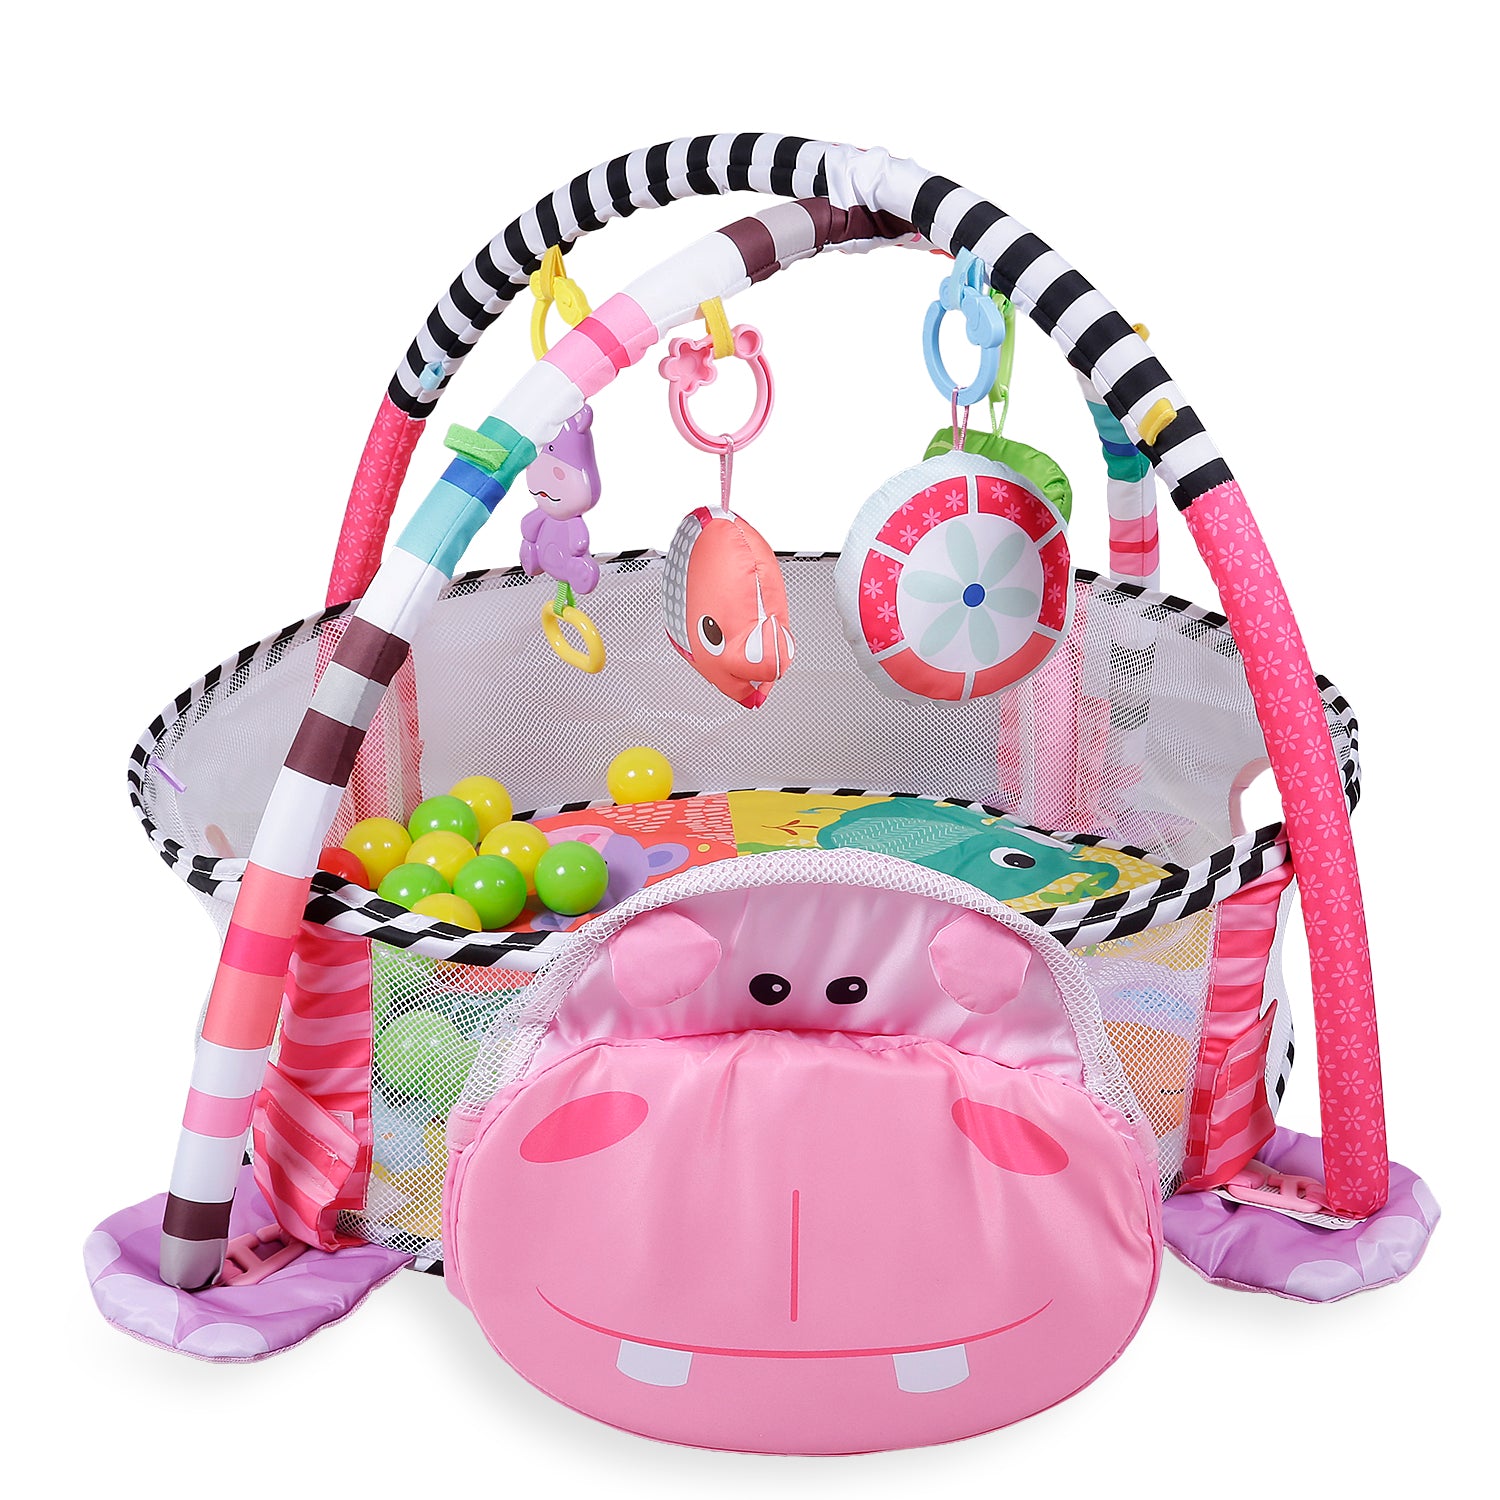 Hippo Infant Play Mat Activity Gym With Hanging Toys And Balls - Pink - Baby Moo